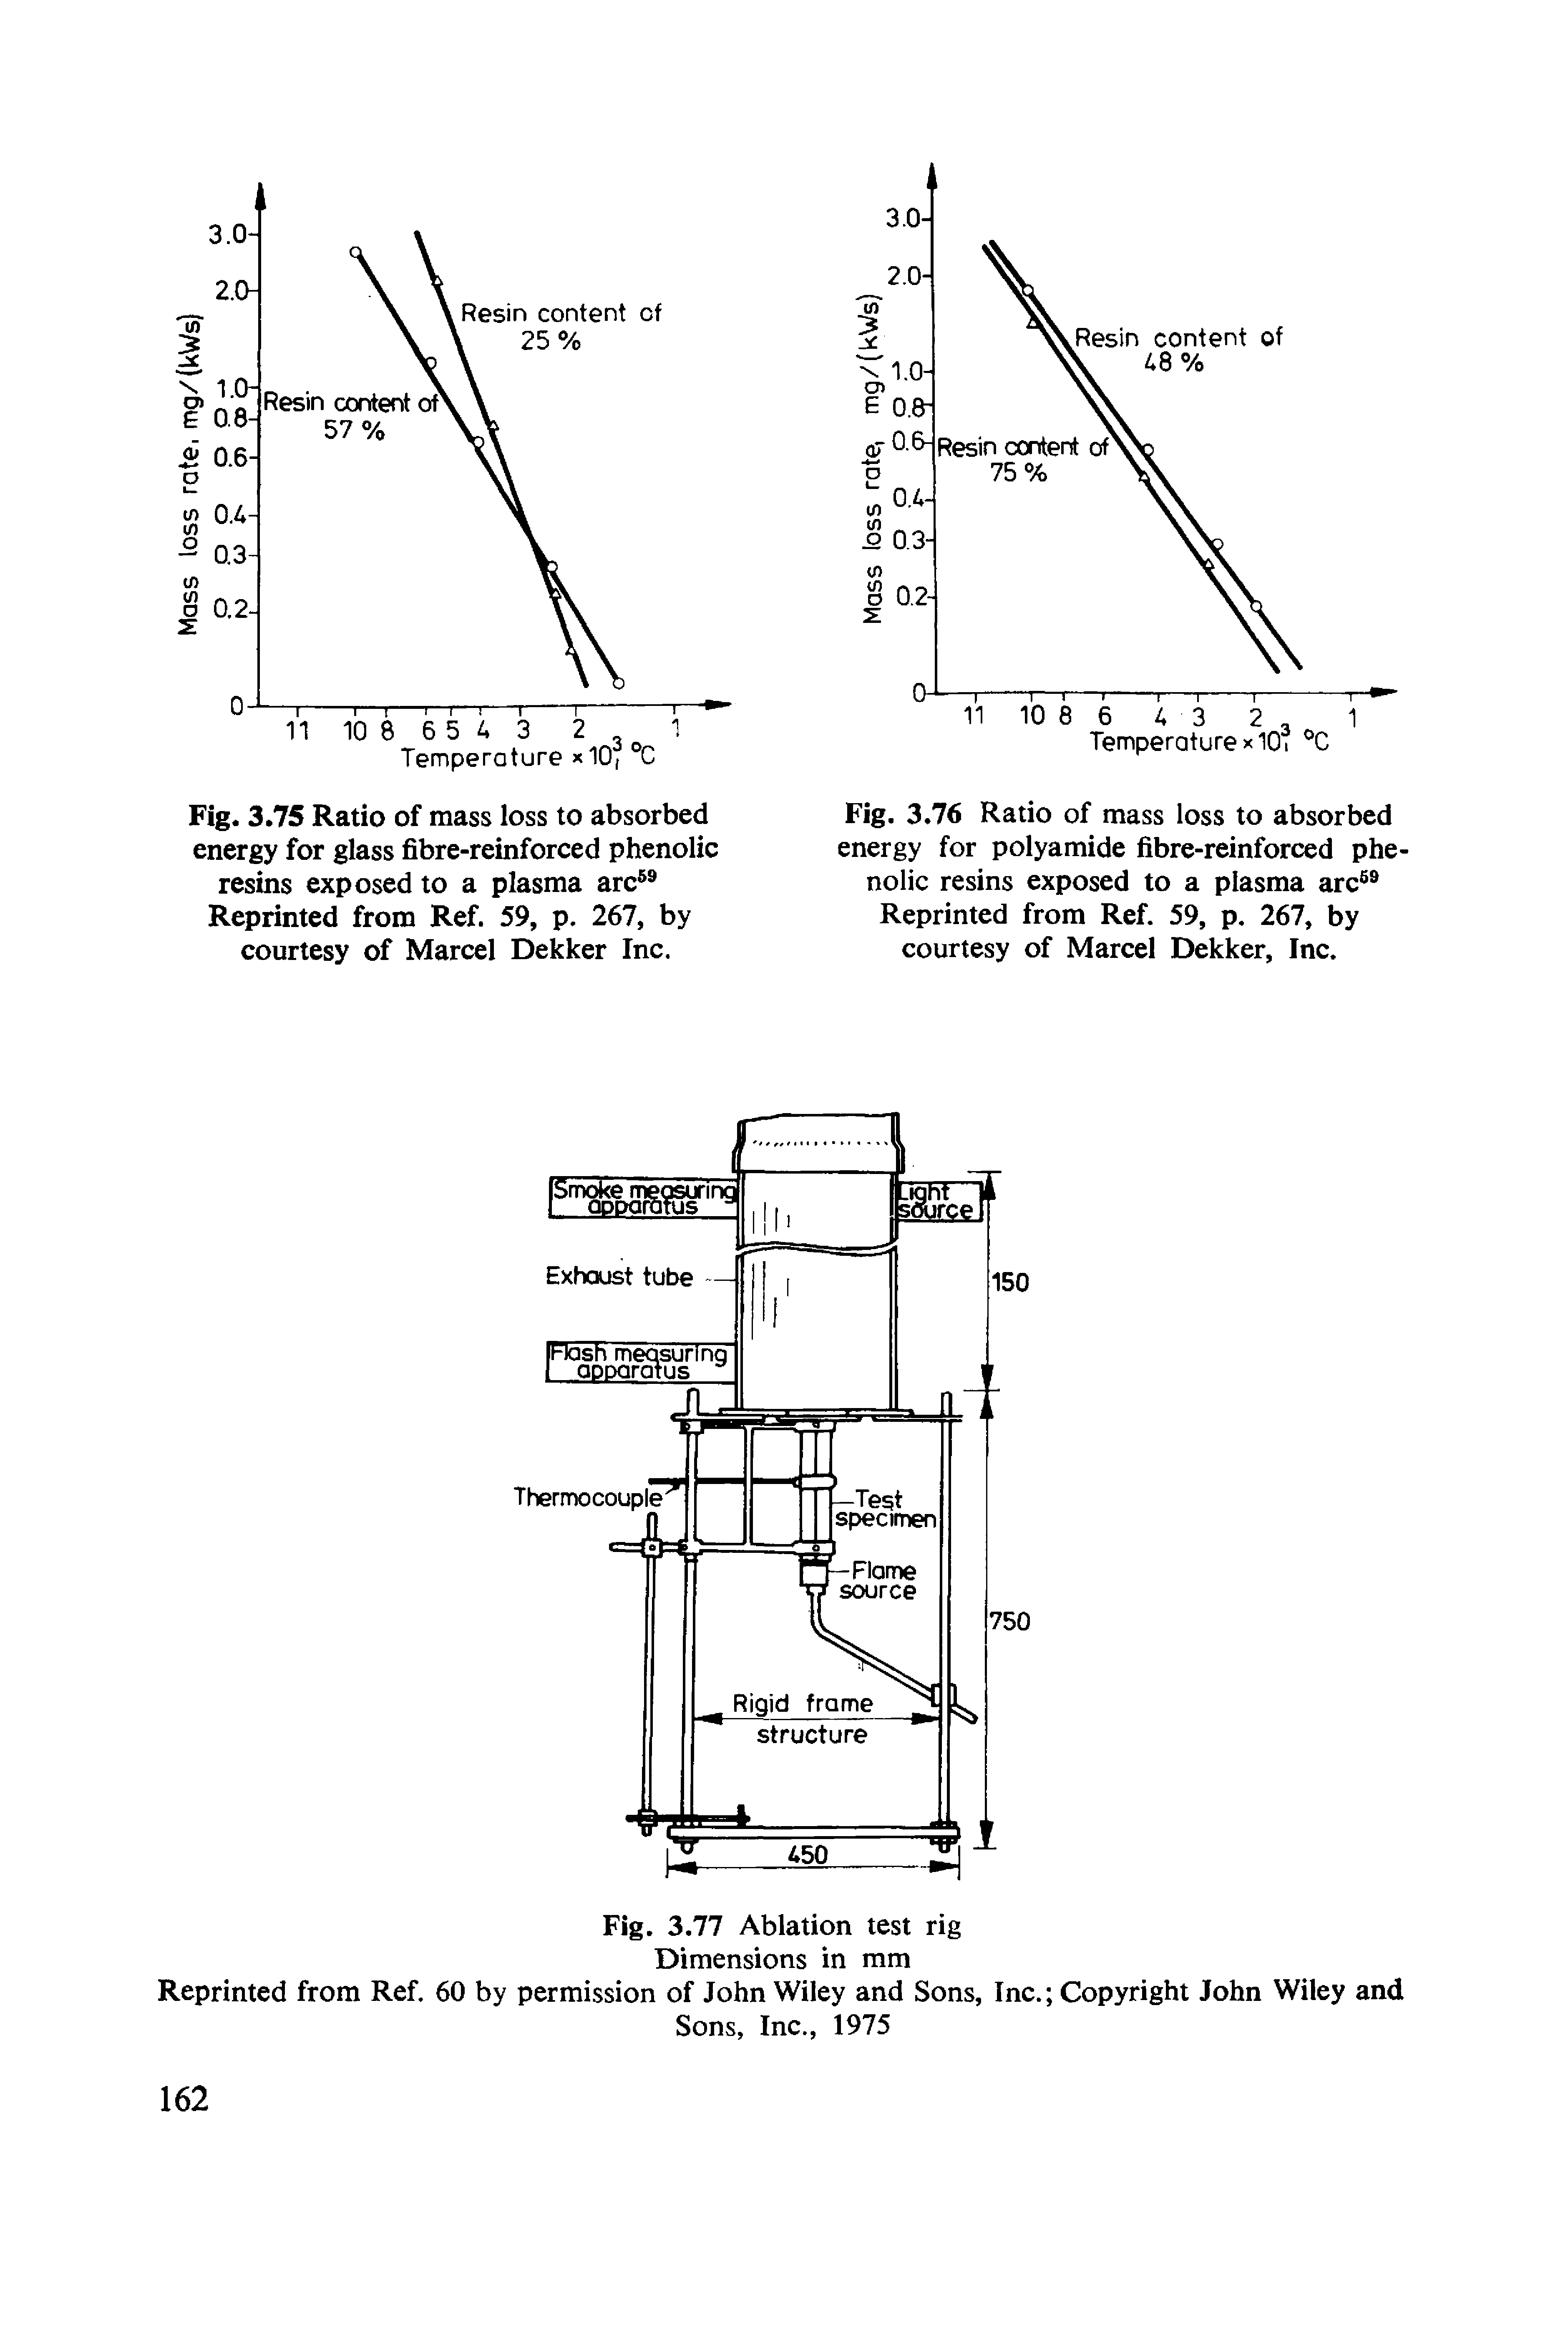 Fig. 3.76 Ratio of mass loss to absorbed energy for polyamide fibre-reinforced phenolic resins exposed to a plasma arc Reprinted from Ref. 59, p. 267, by courtesy of Marcel Dekker, Inc.